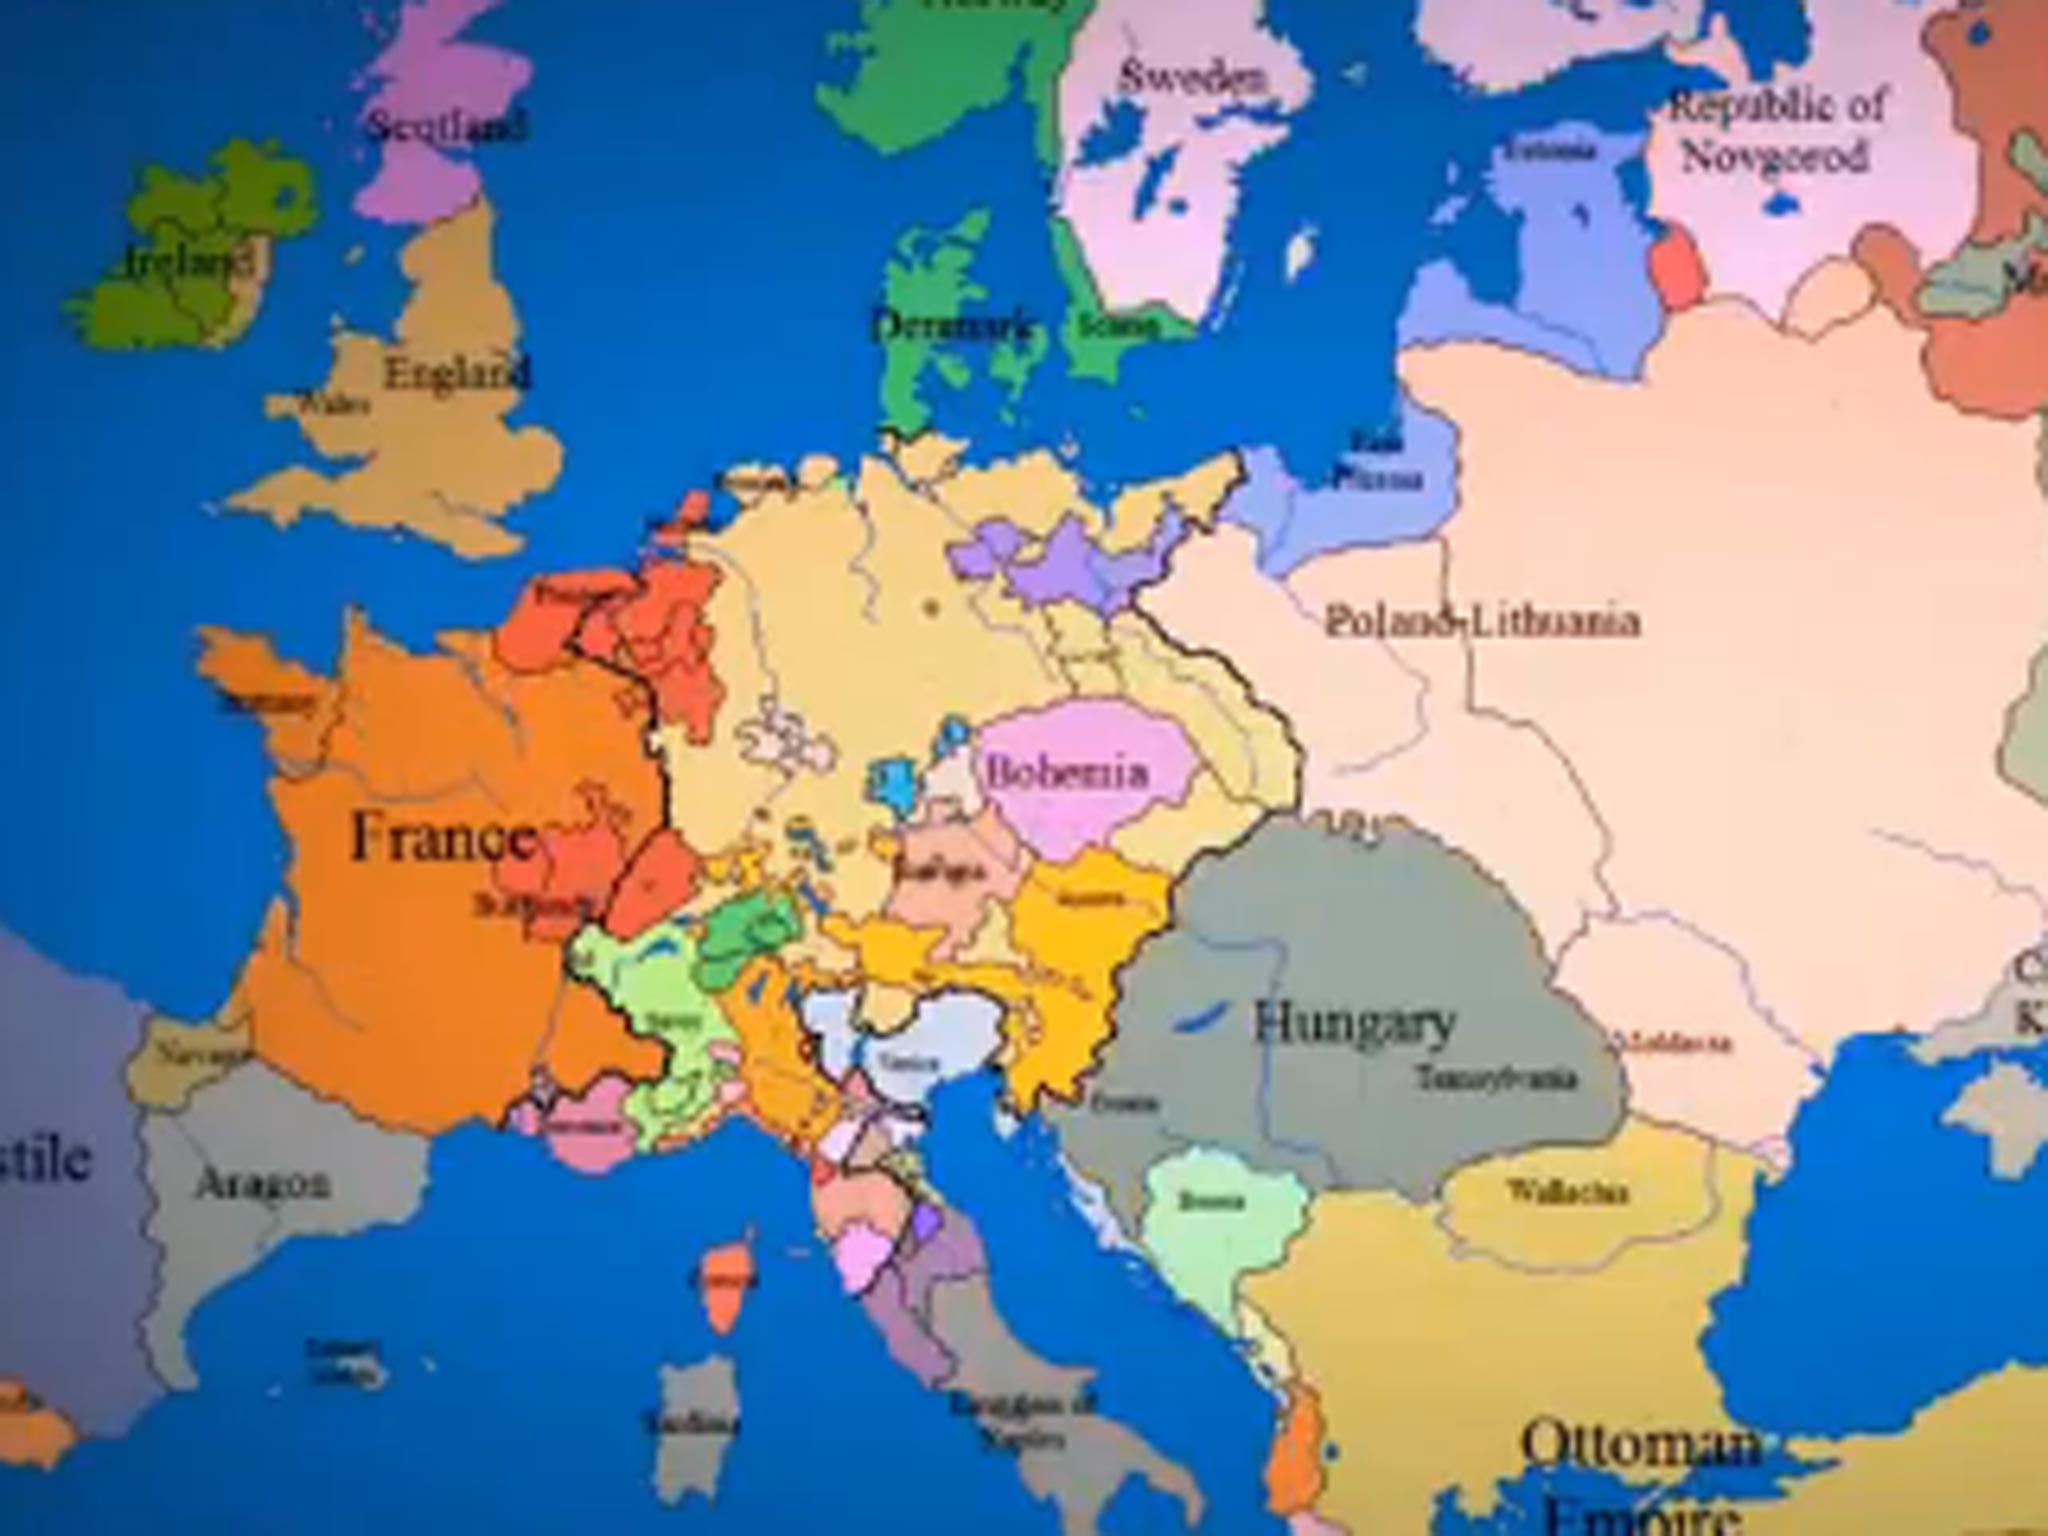 The video shows the rise and fall of empires across Europe